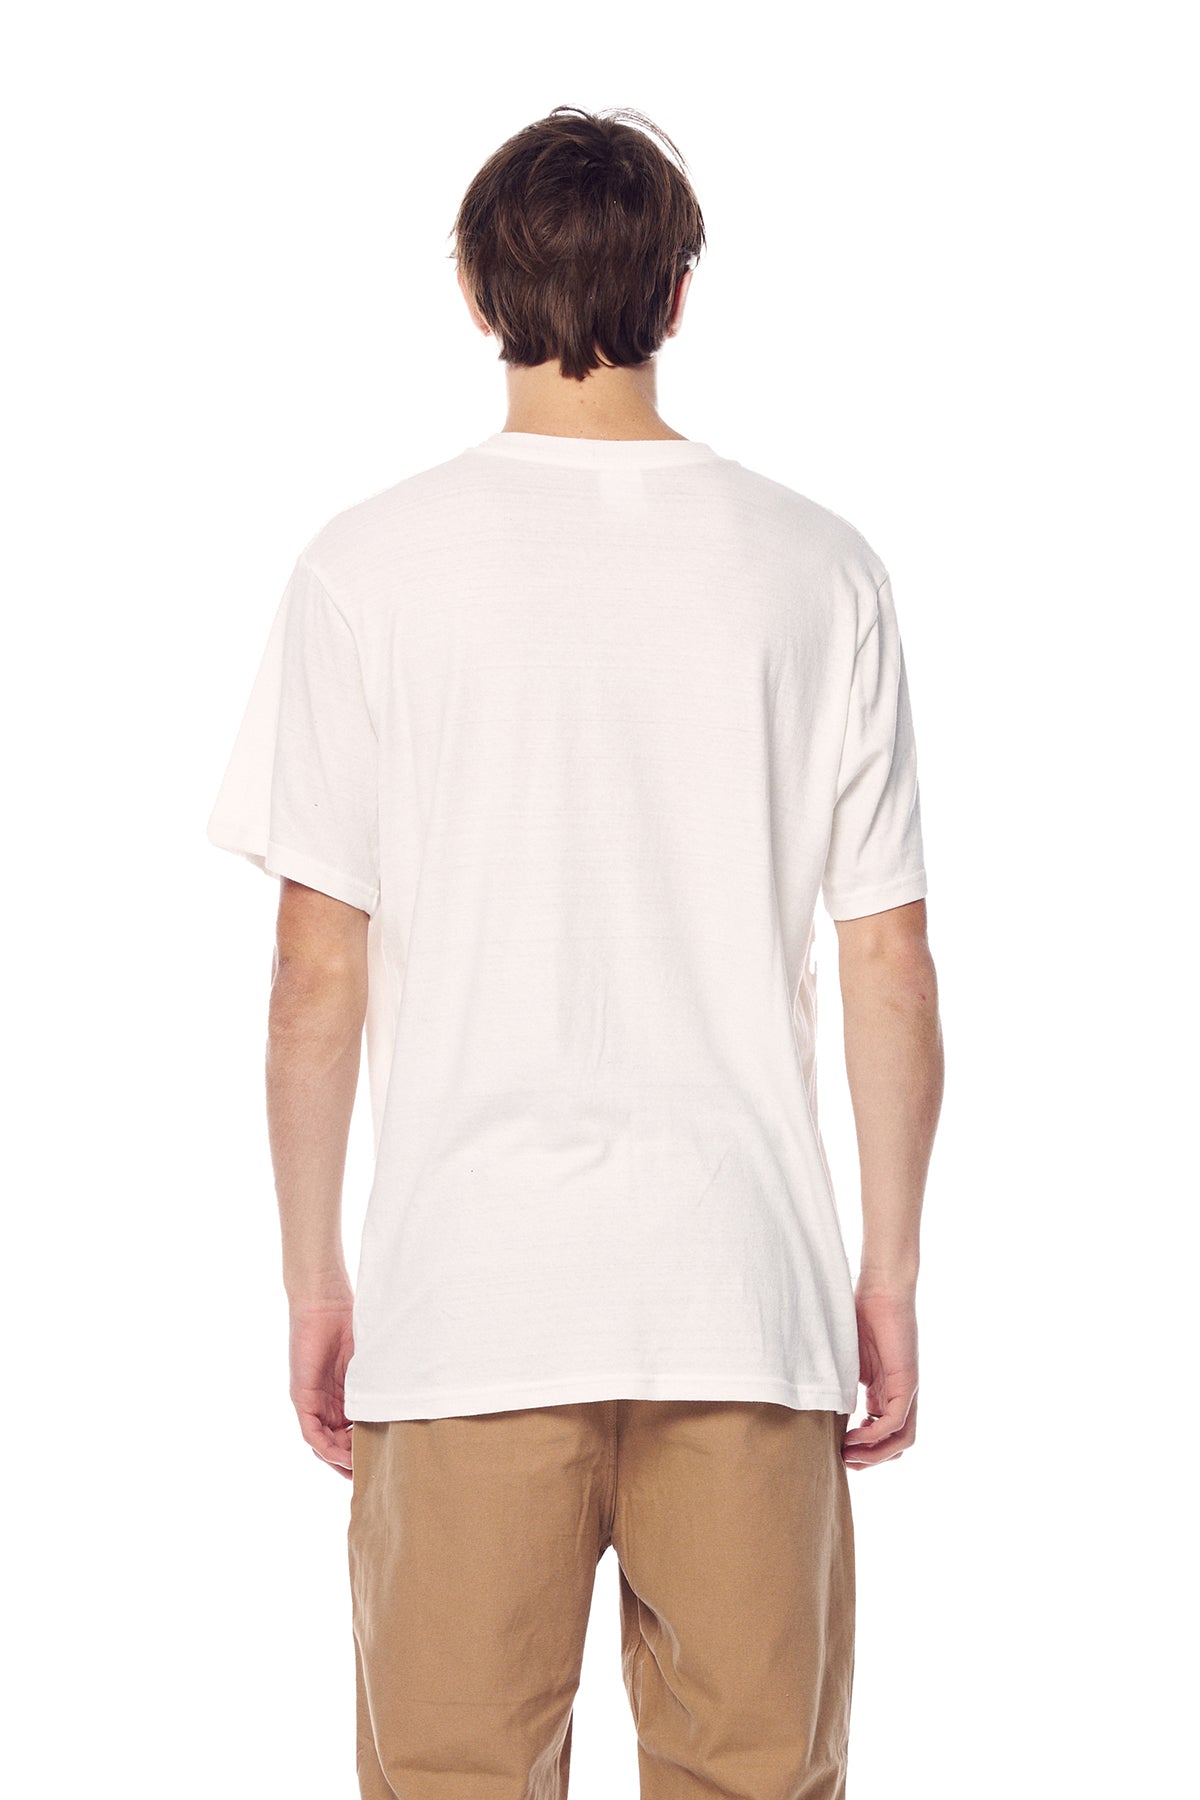 END GAMES 50/50 REG SS TEE - WASHED WHITE